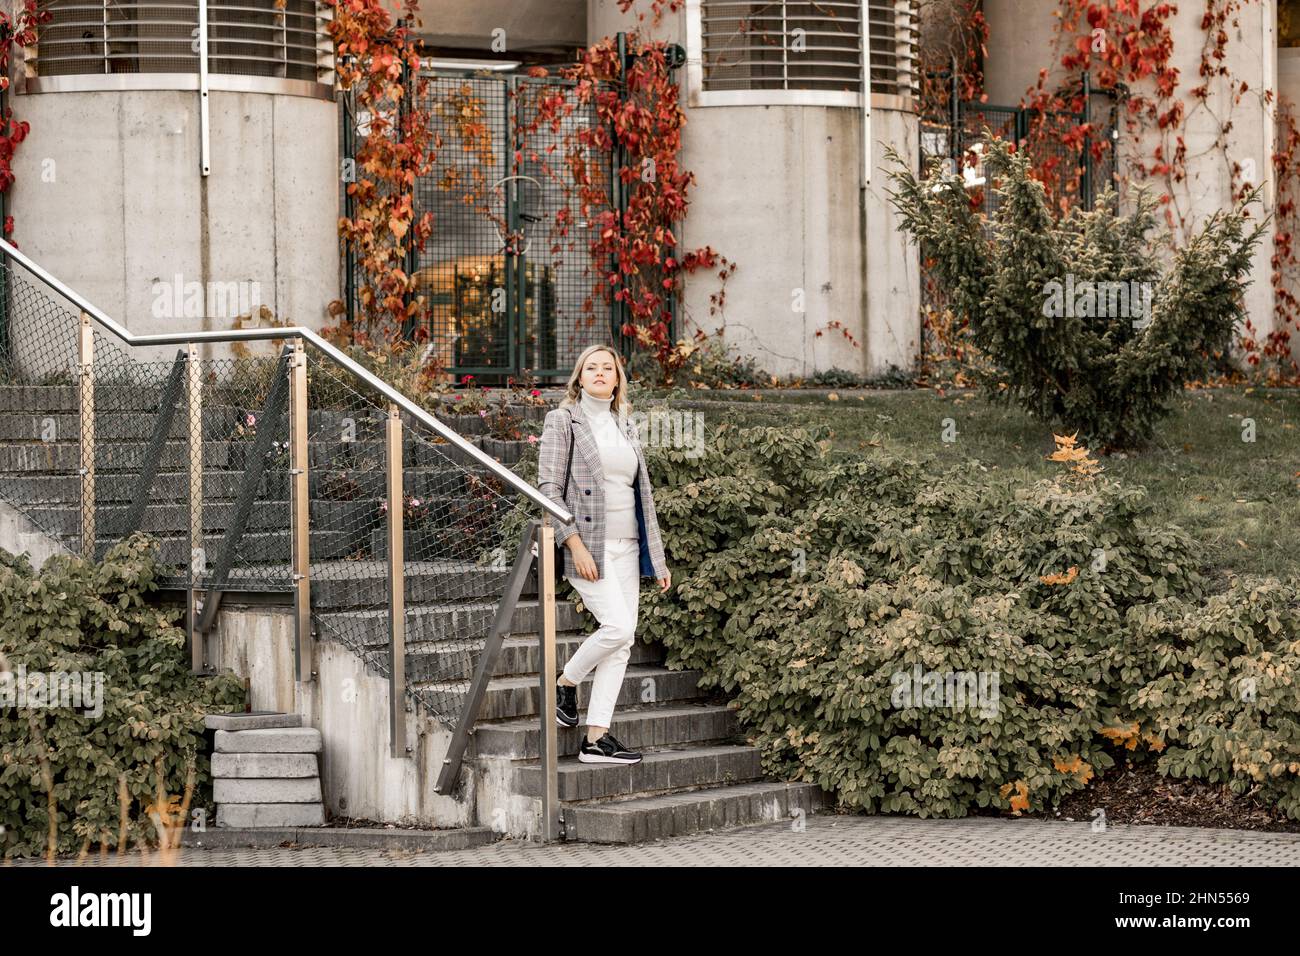 Attractive middle-aged woman in checkered jacket and grey roll-neck sweater going down concrete stairs on autumn day. Stock Photo